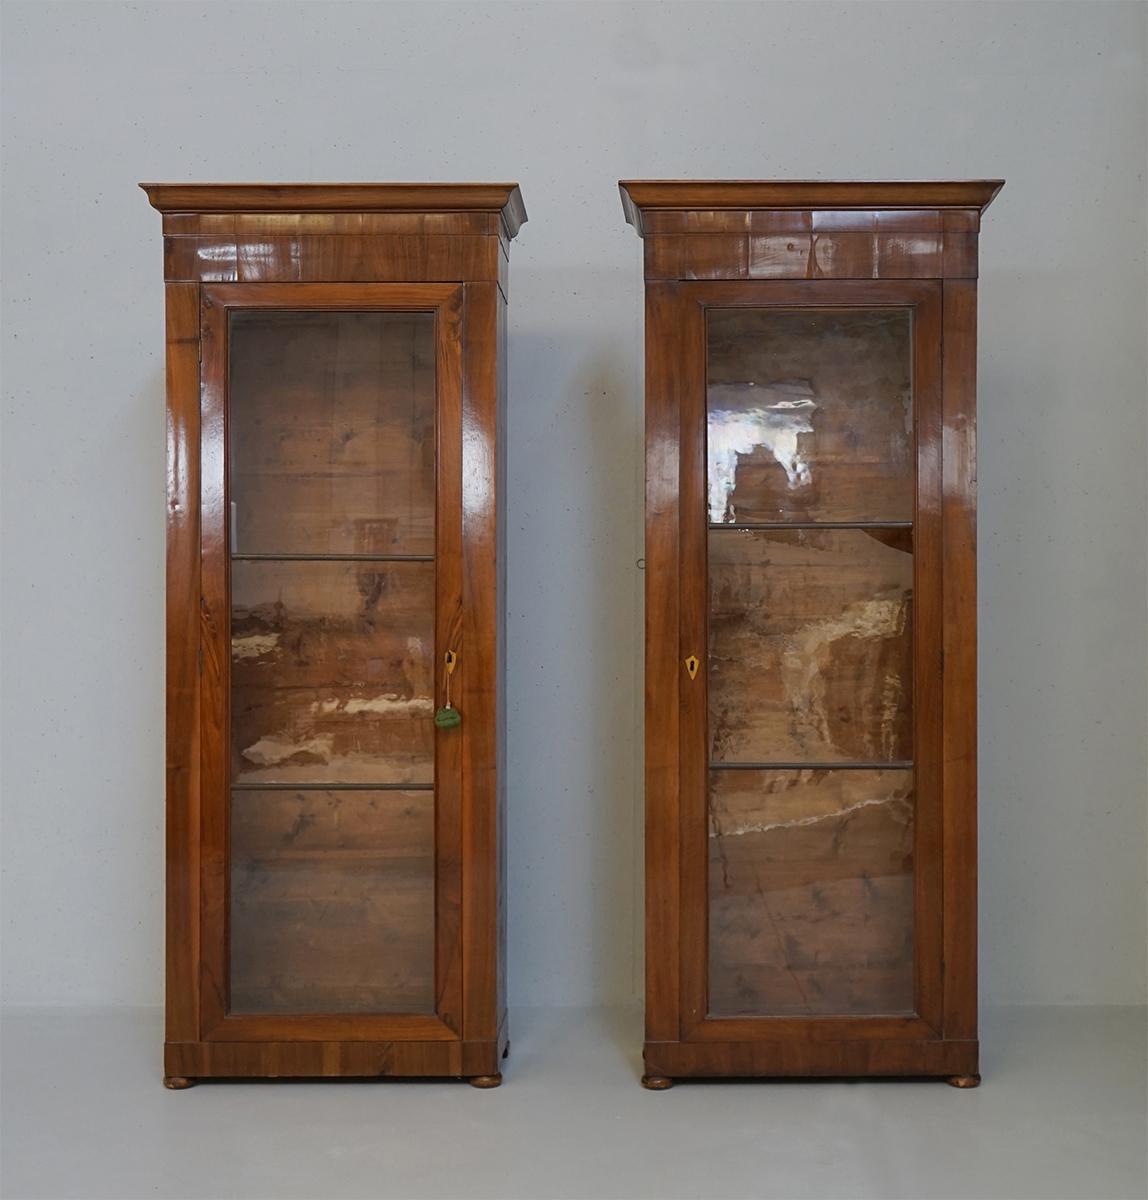 Pair of Late Empire style bookcases. Small in size, they are composed of elements in solid walnut and others in folder and feature a wick shellac finish. Large glass door and internal shelves with ladder shelves. They comes with original shelves